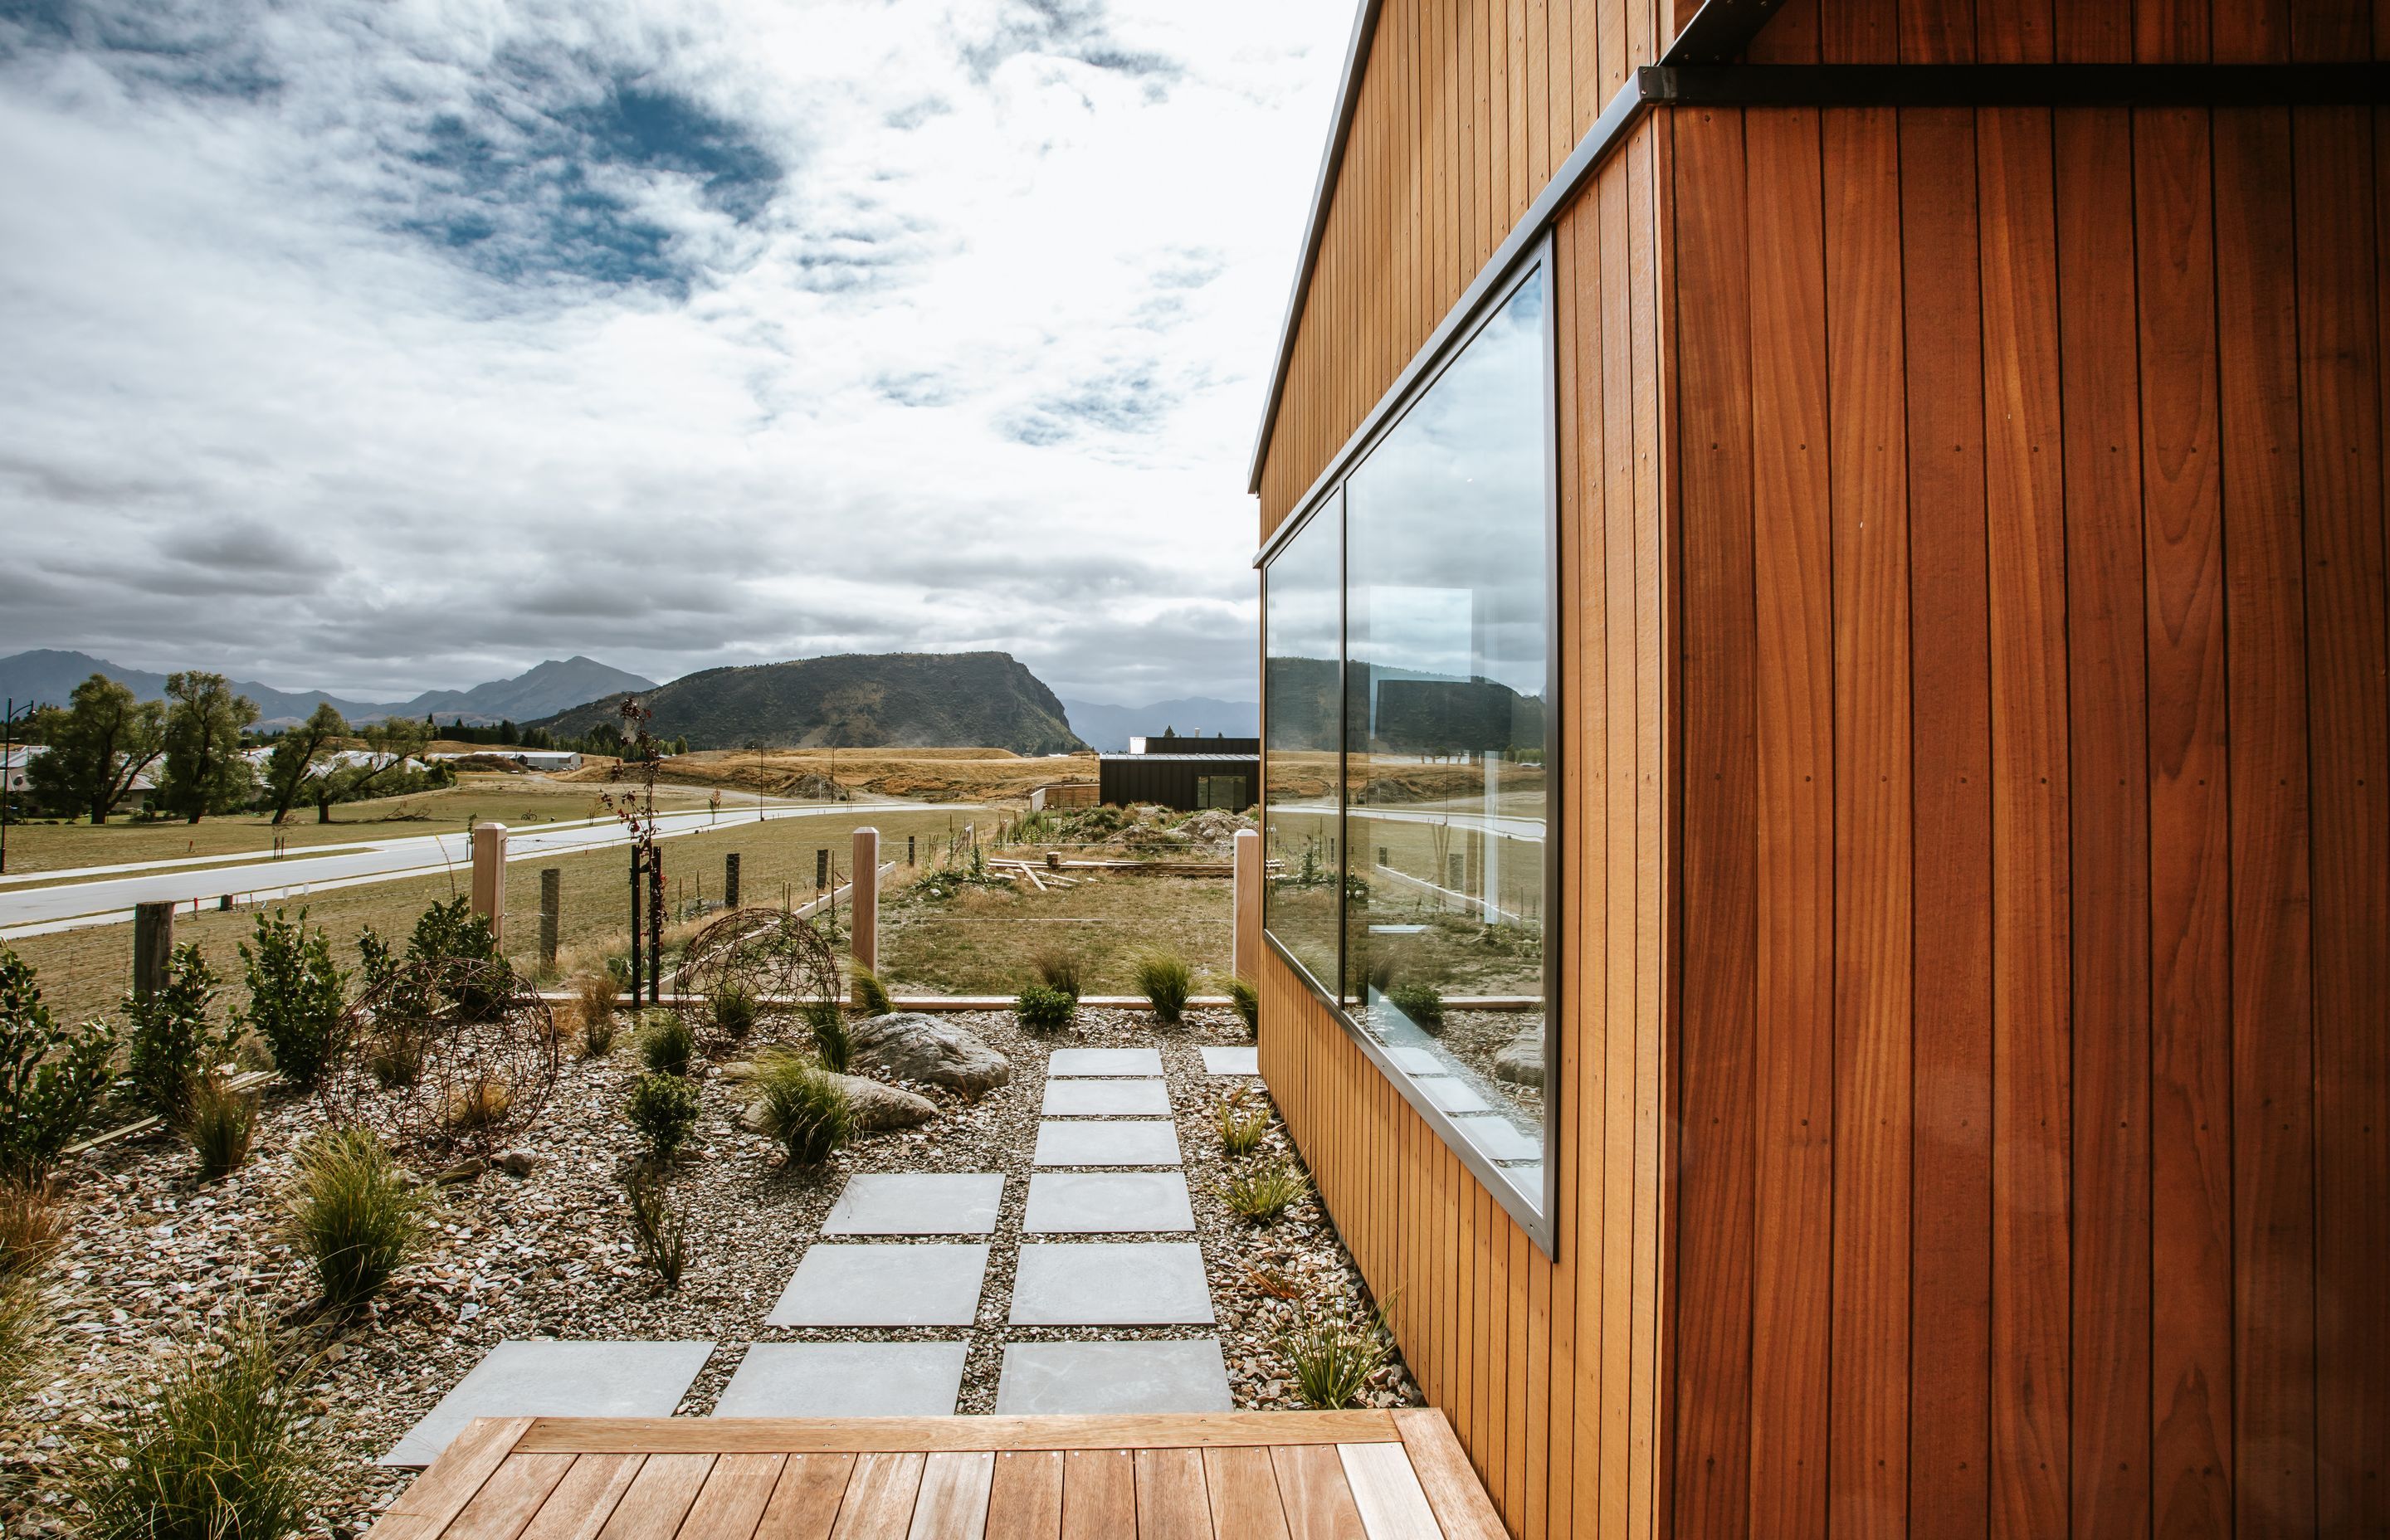 The stunning Wanaka setting provides jaw-dropping vistas from all aspects of the property.